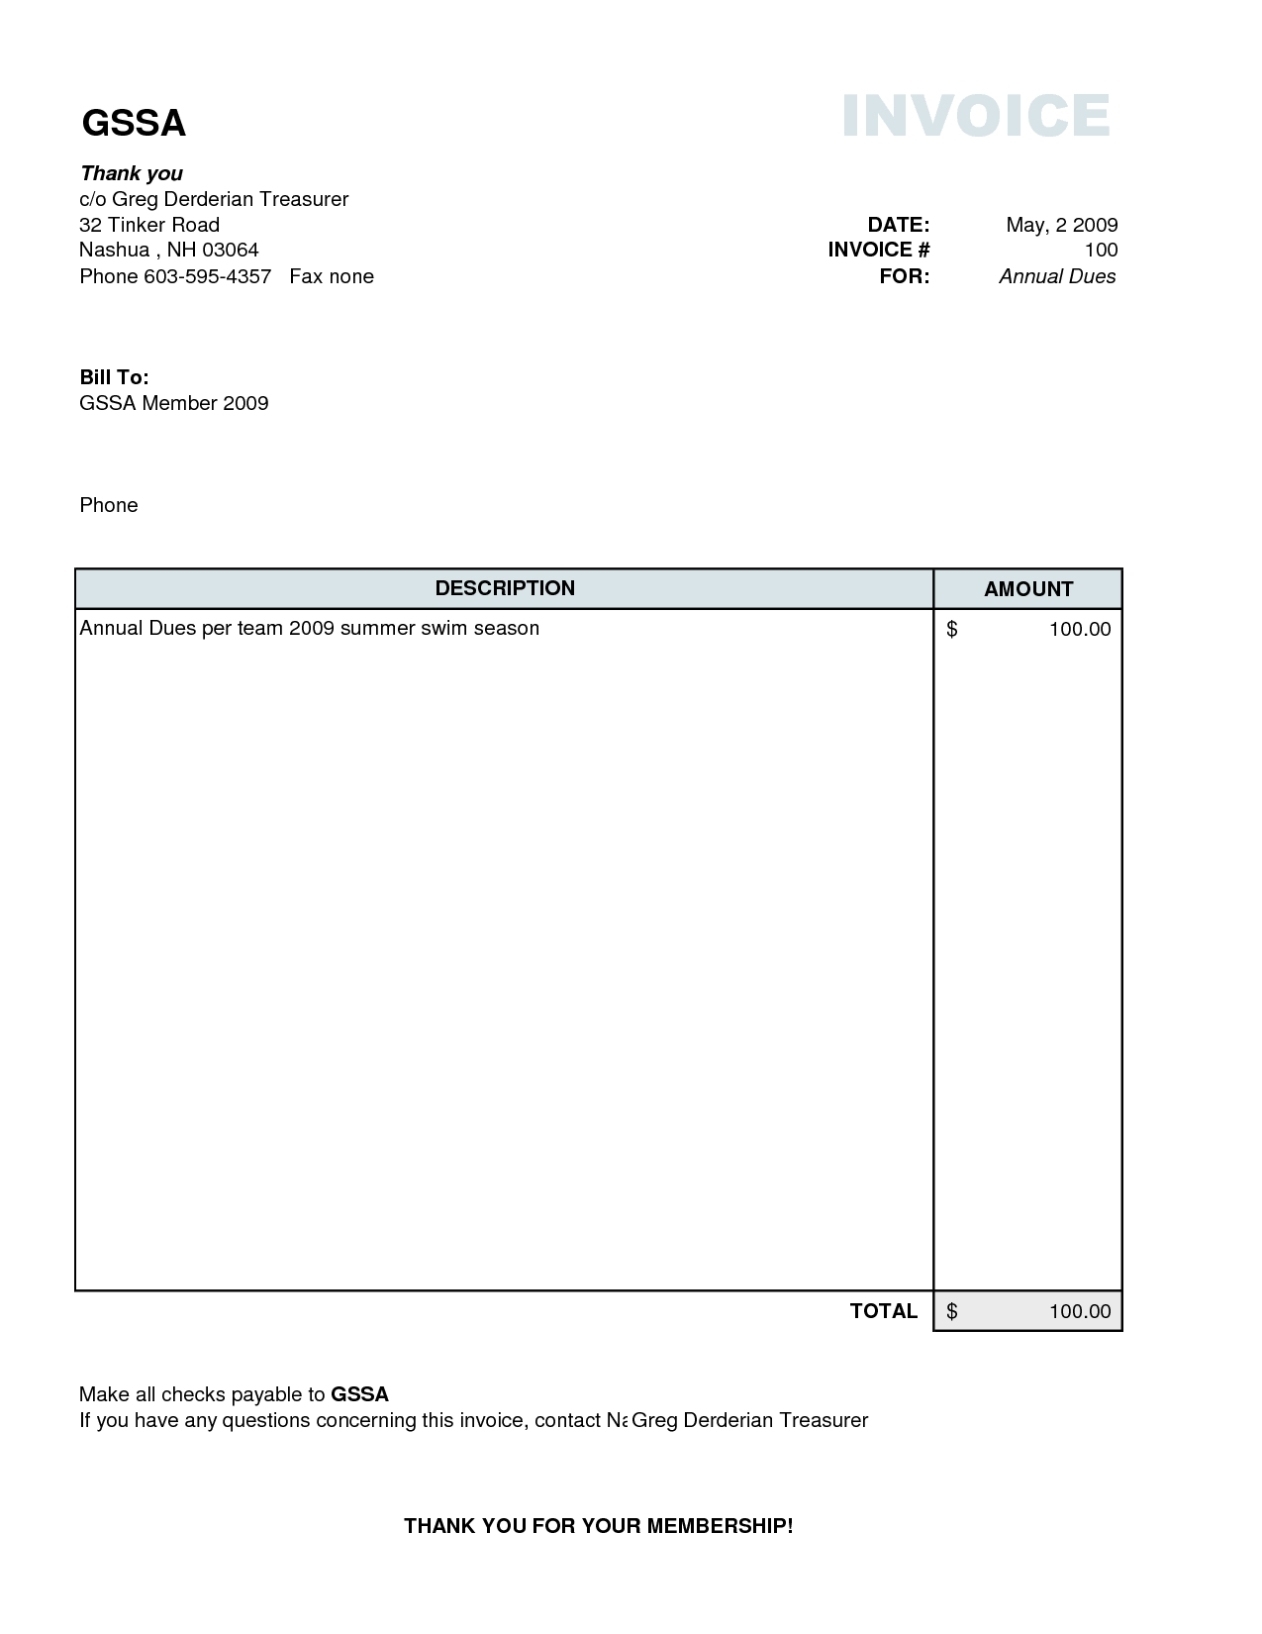 Simple Invoice Example | Invoice Example within Interest Invoice Template